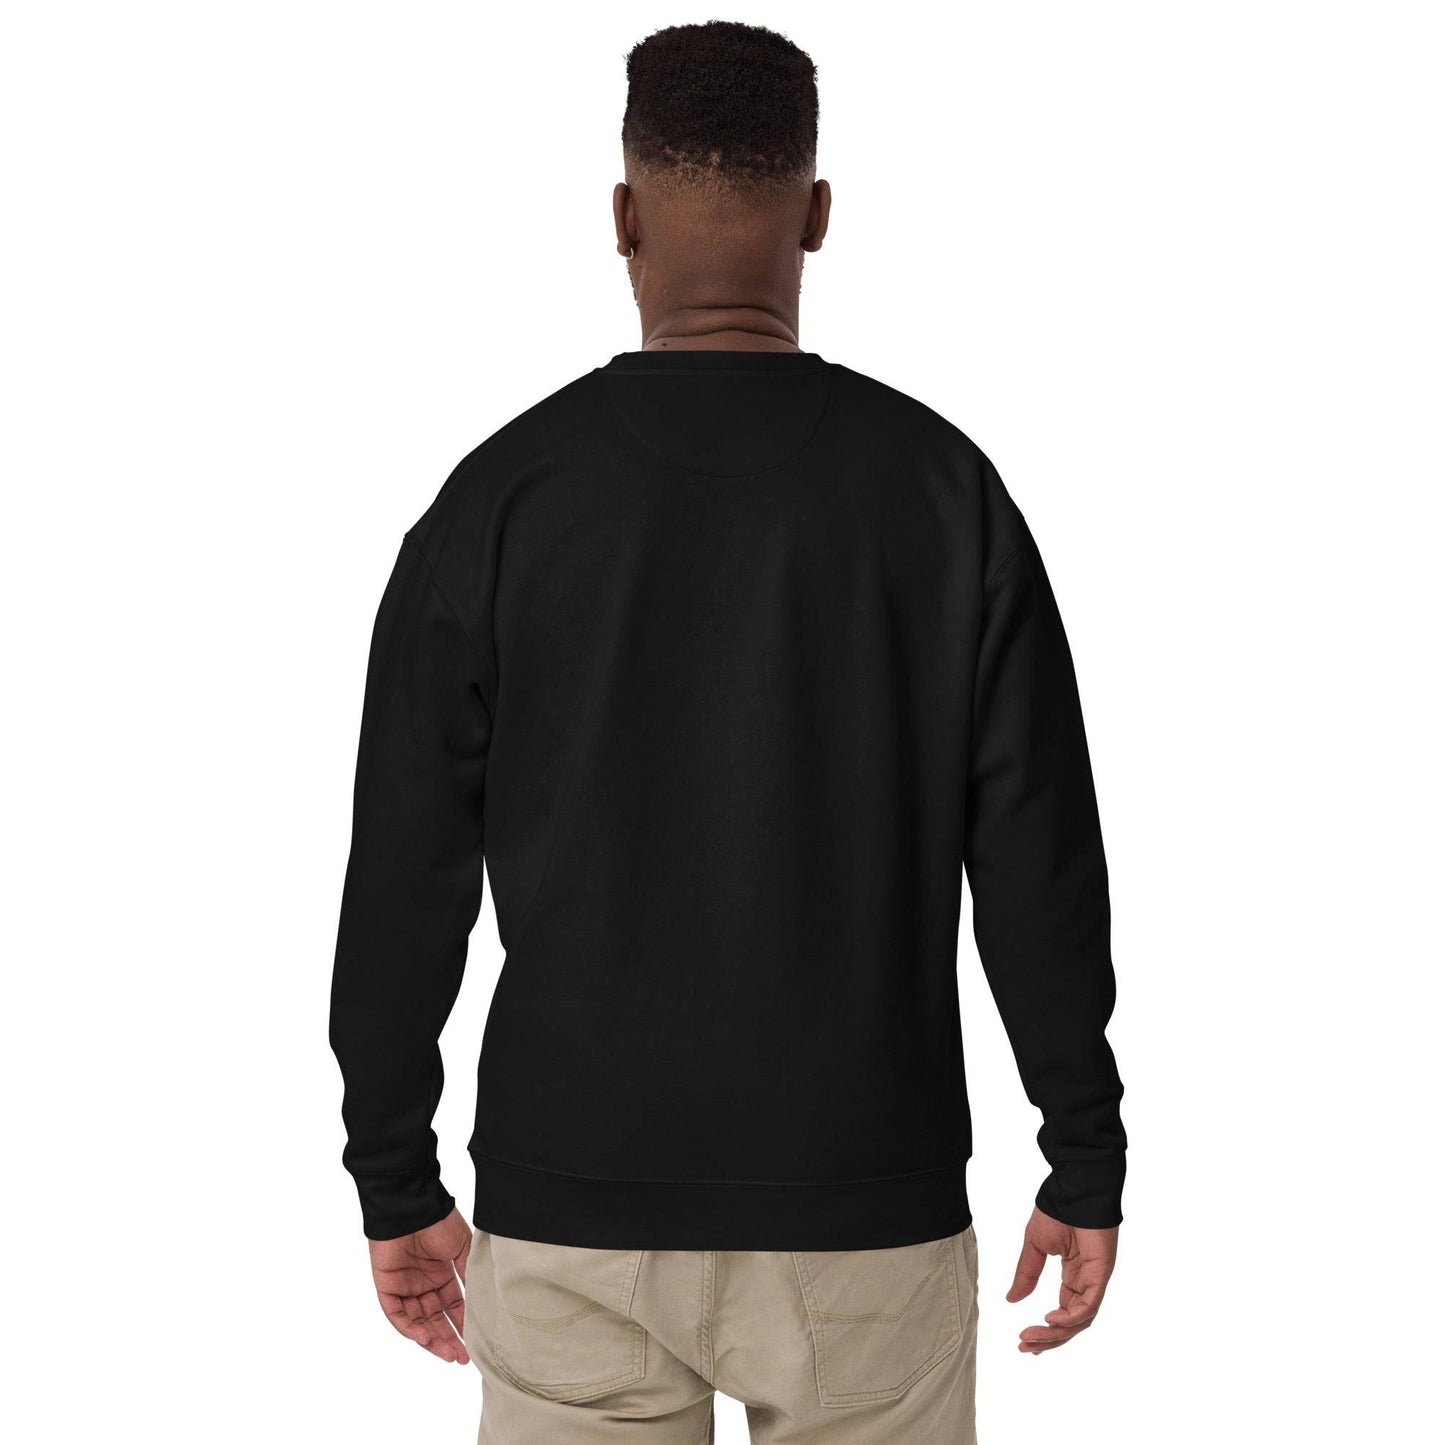 back of a man in a black premium sweatshirt with writing that says Black Wall Street and Greenwood